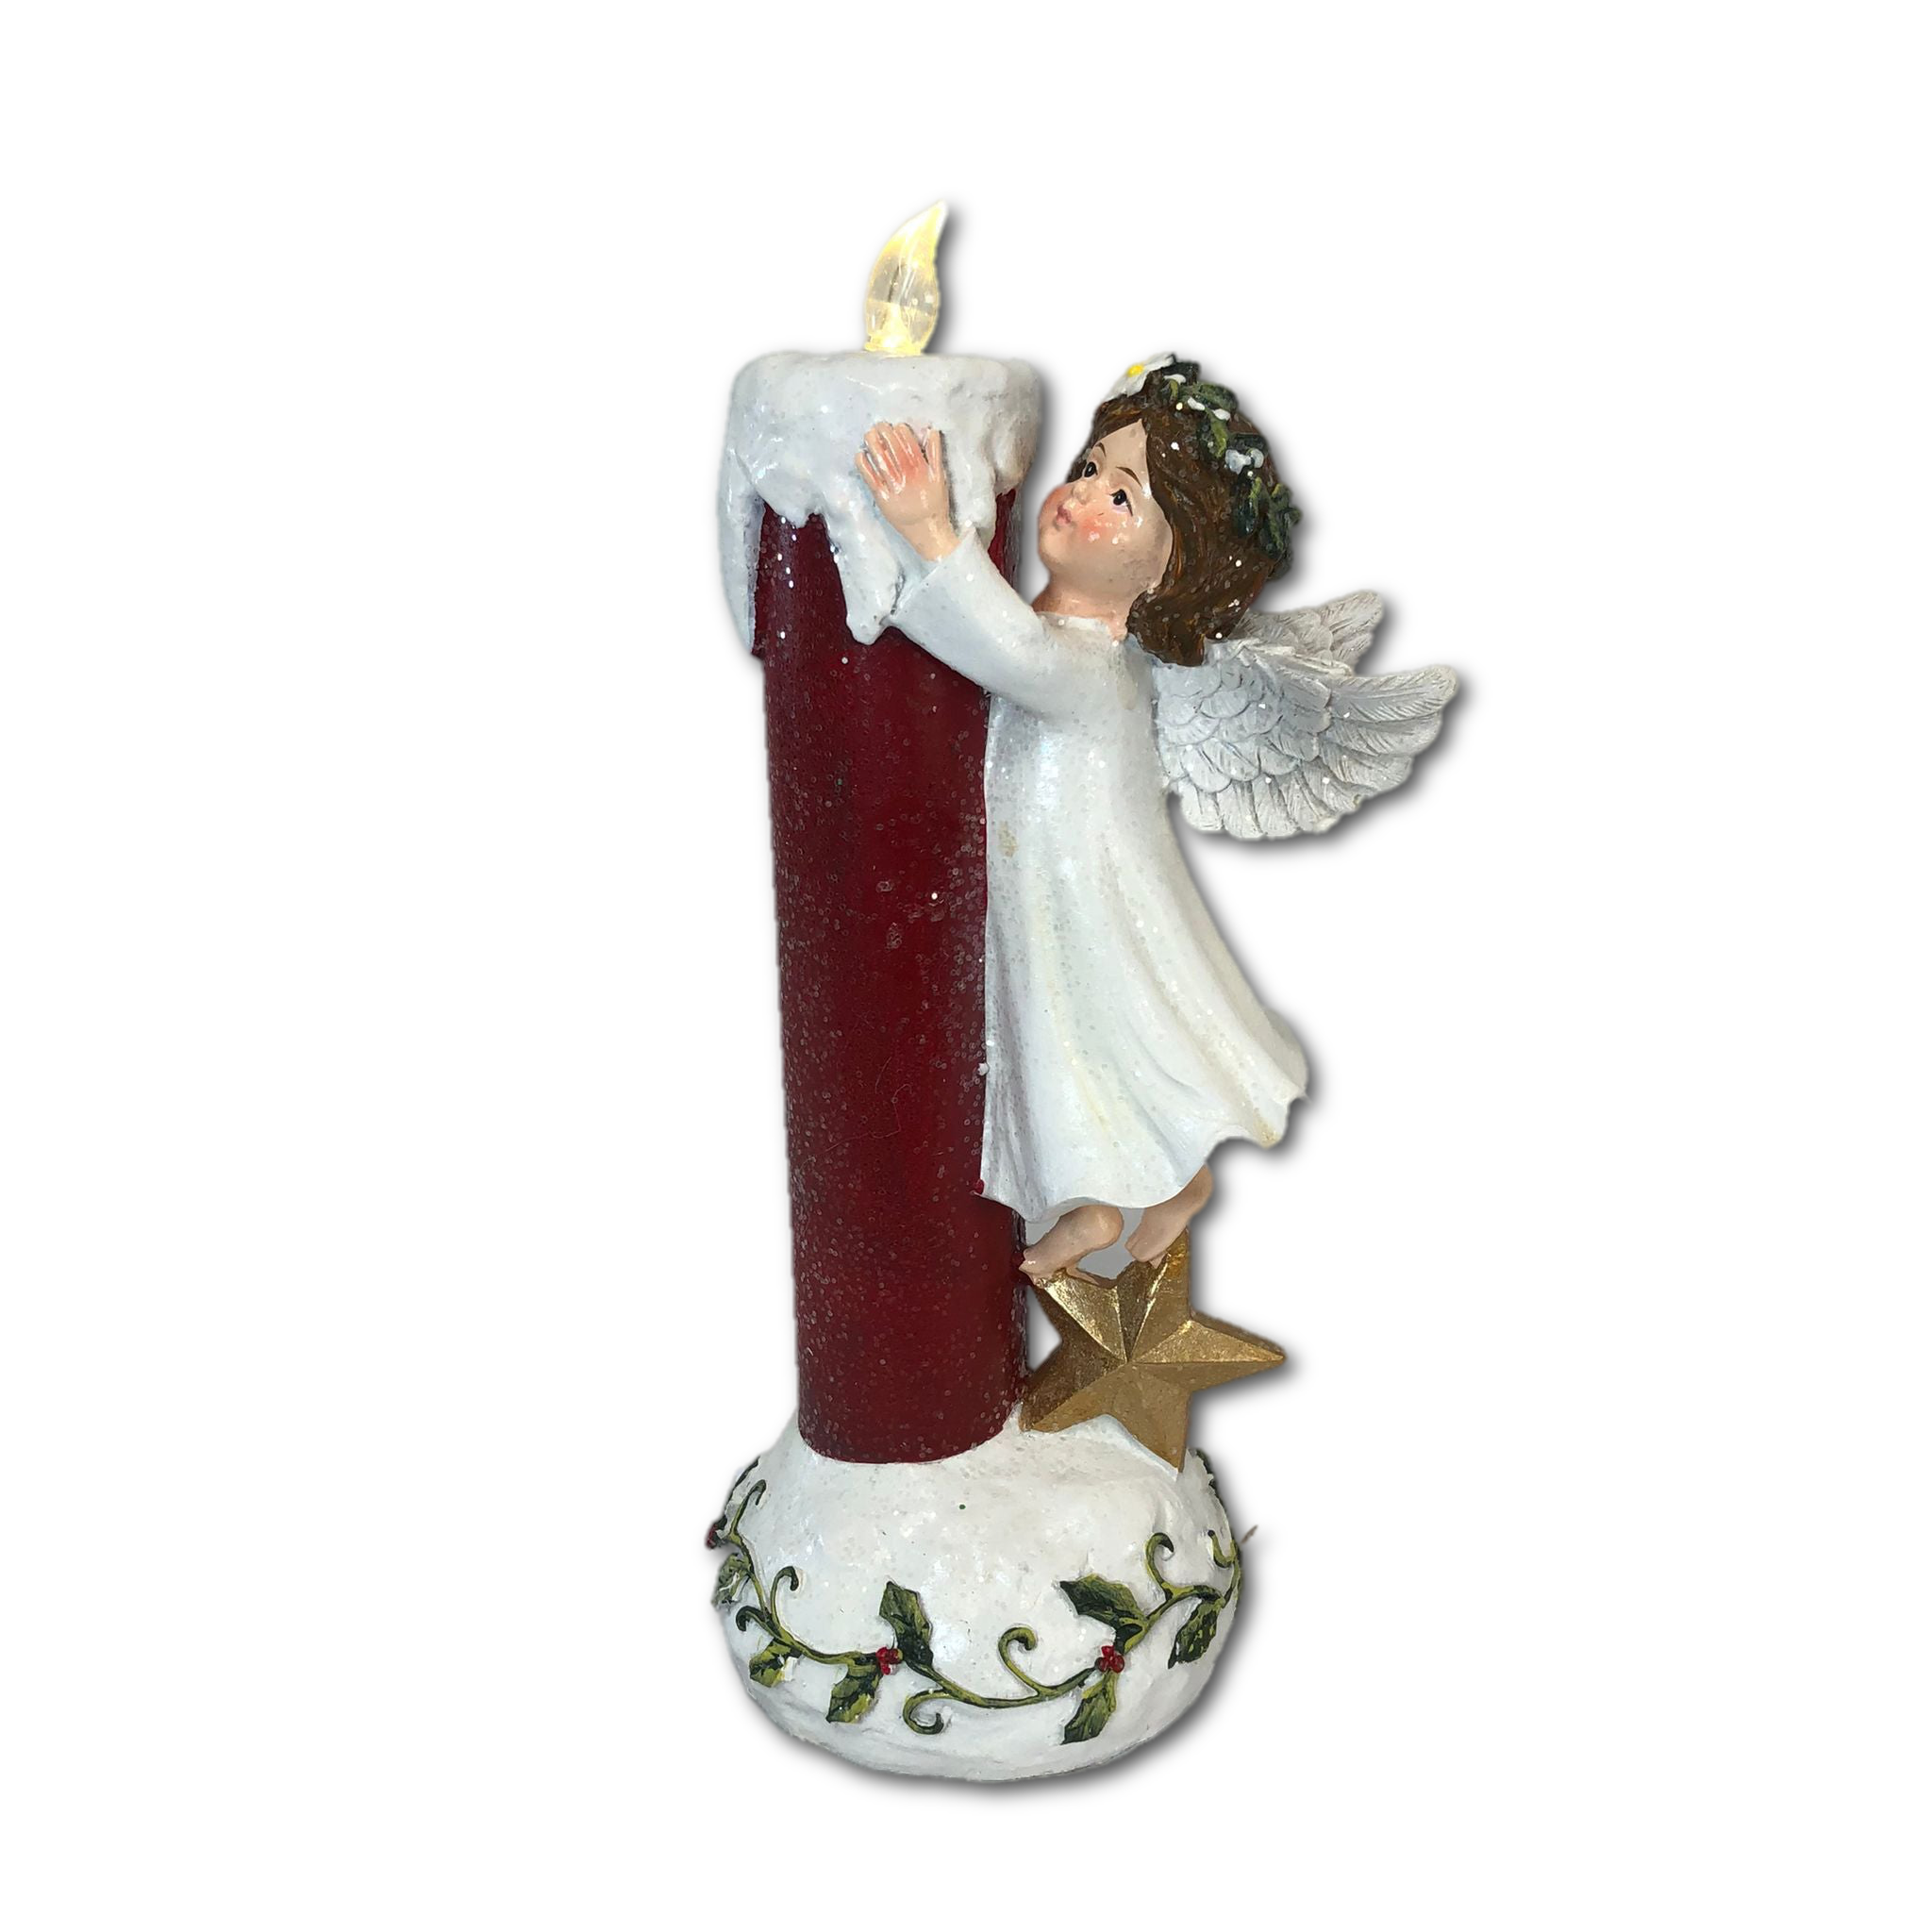 Holiday Character with Illuminated Candle by Valerie